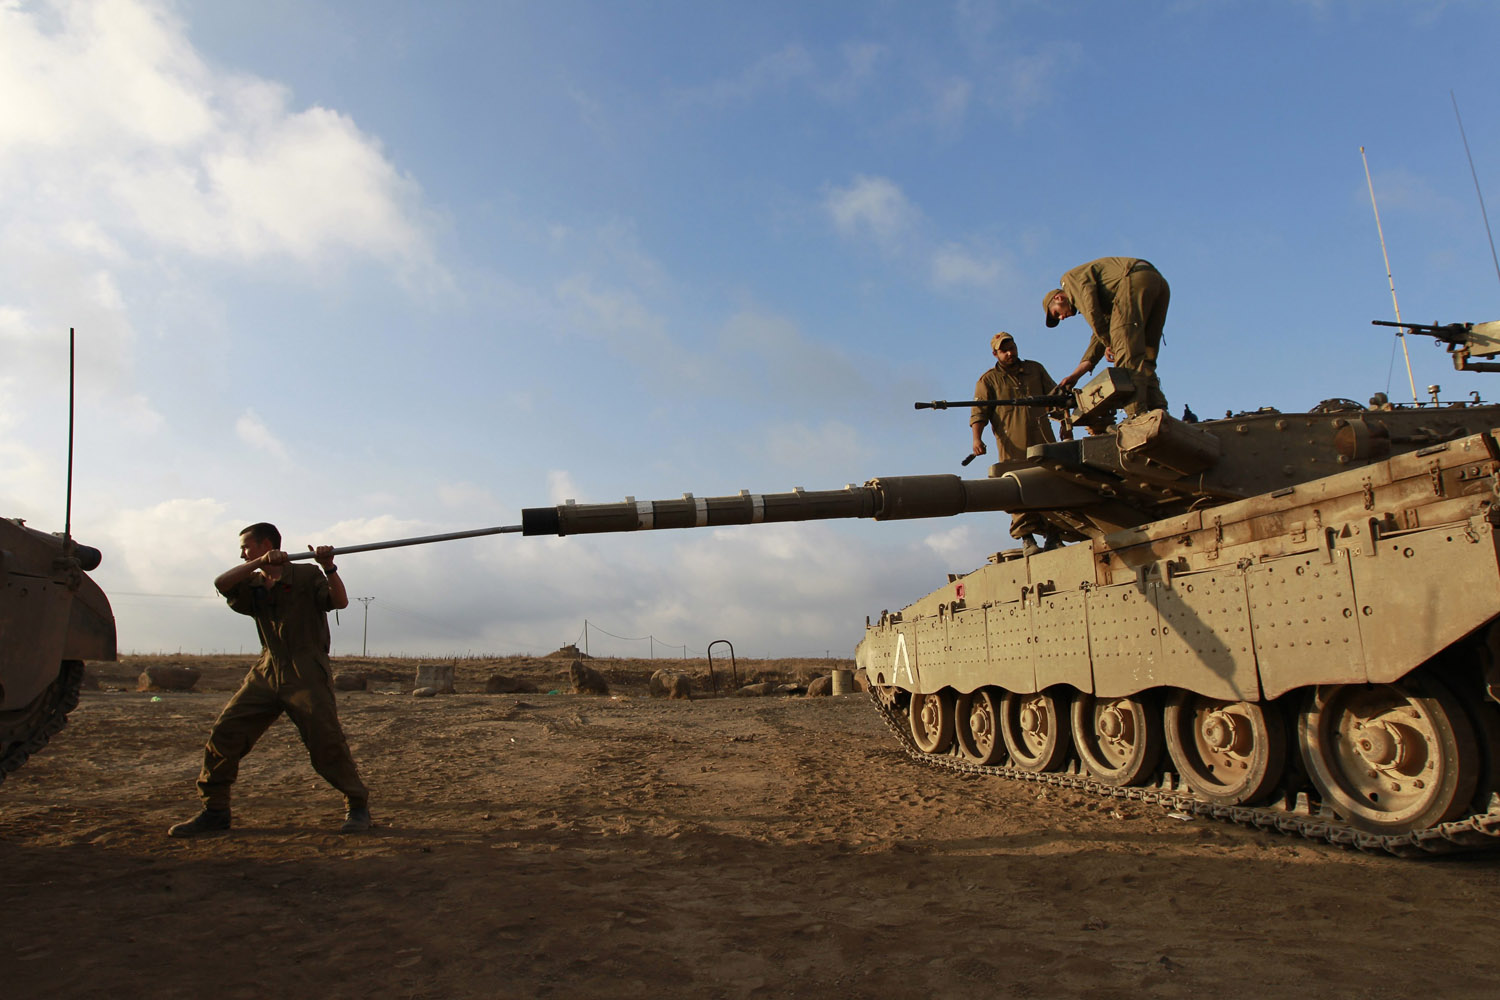 An Israeli soldier cleans the barrel of a tank near the border with Syria in the Israeli-occupied Golan Heights